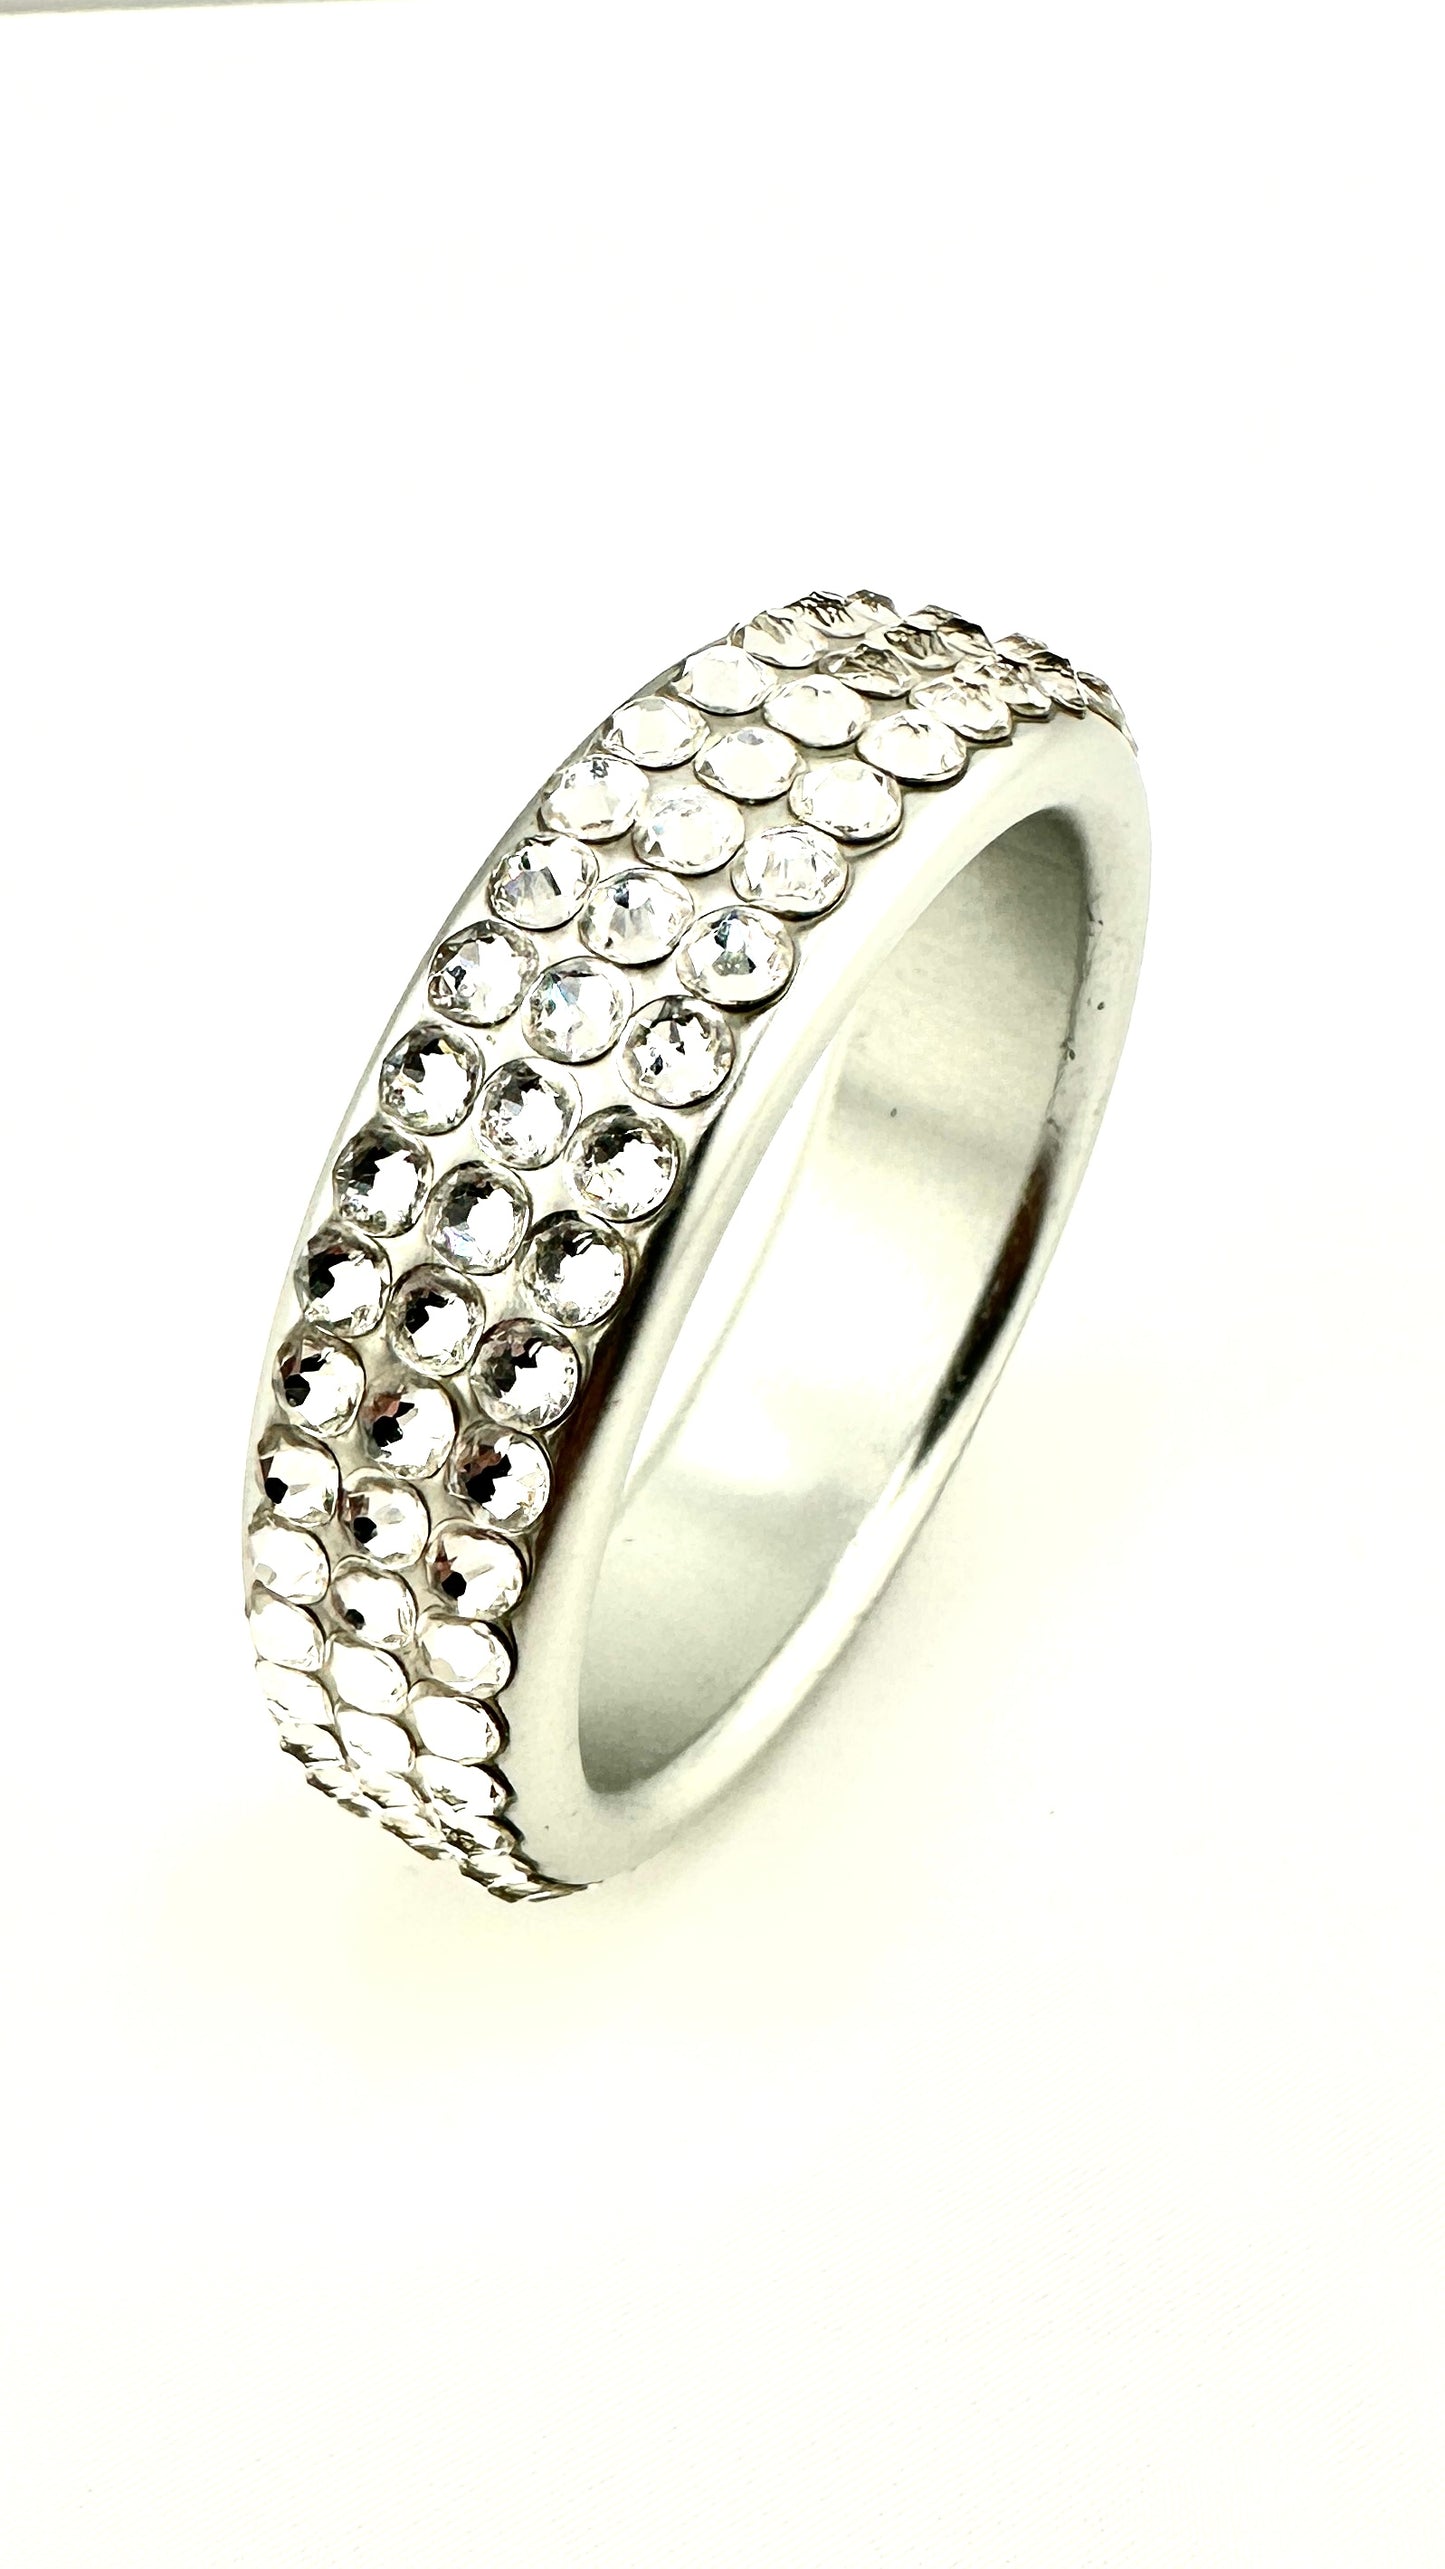 CRYSTAL STUDDED SILVER ALUMINUM COCK RING